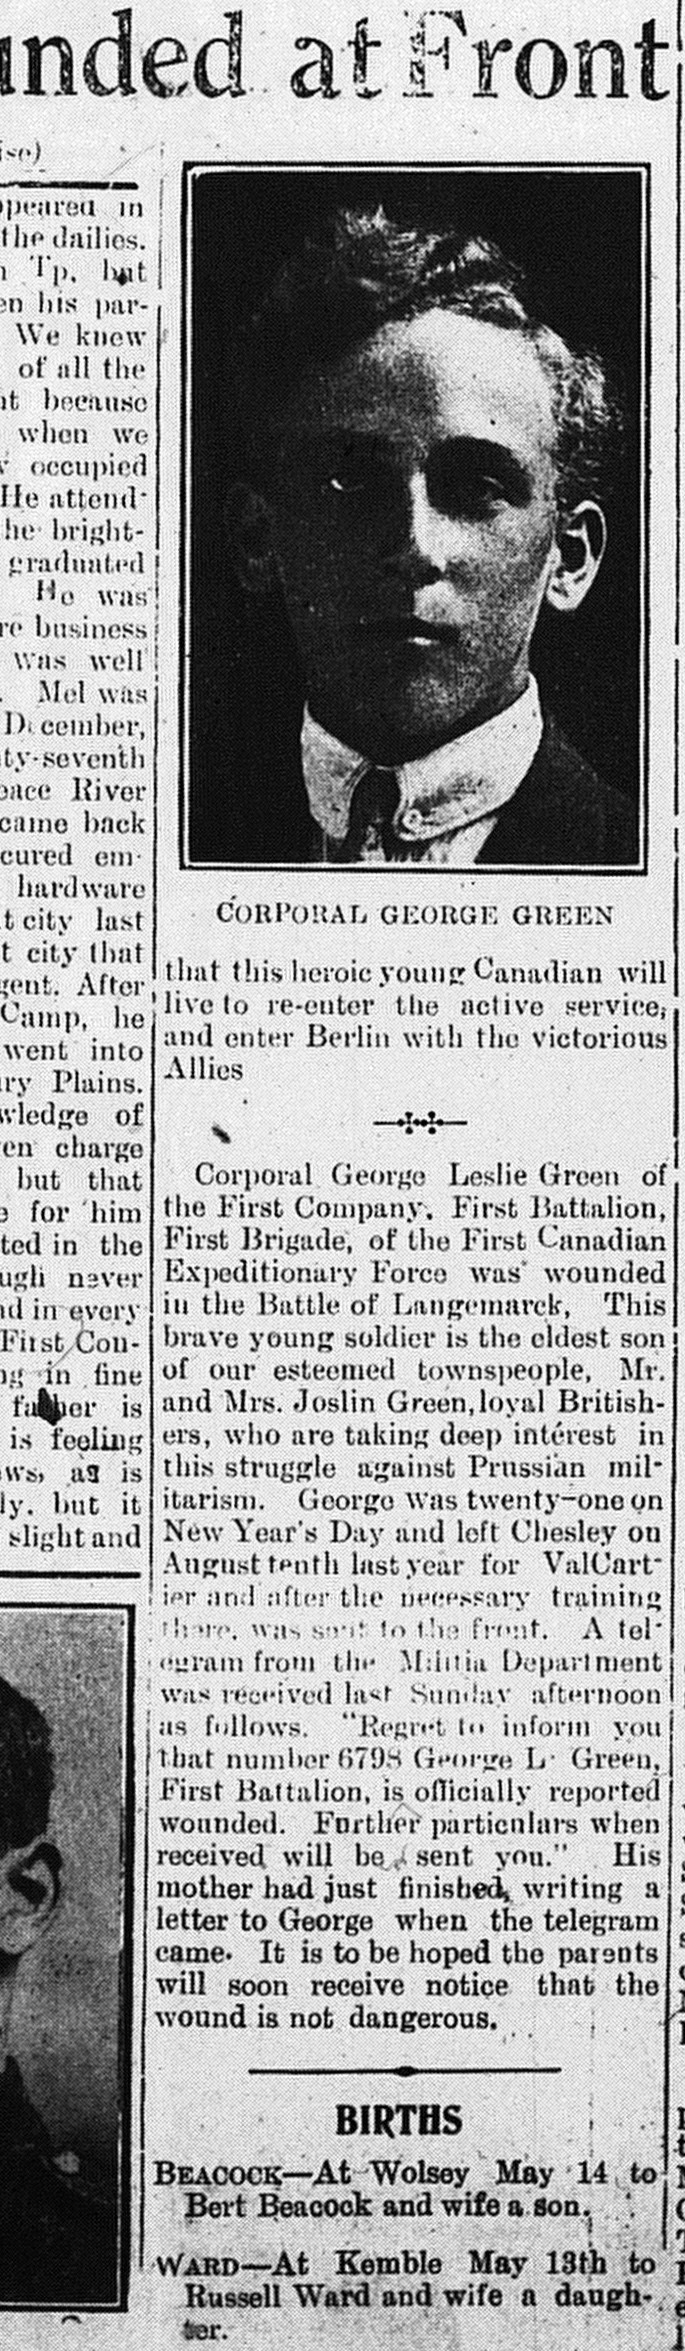 Wiarton Echo, May 19, 1915, p.1, part 2 of 2